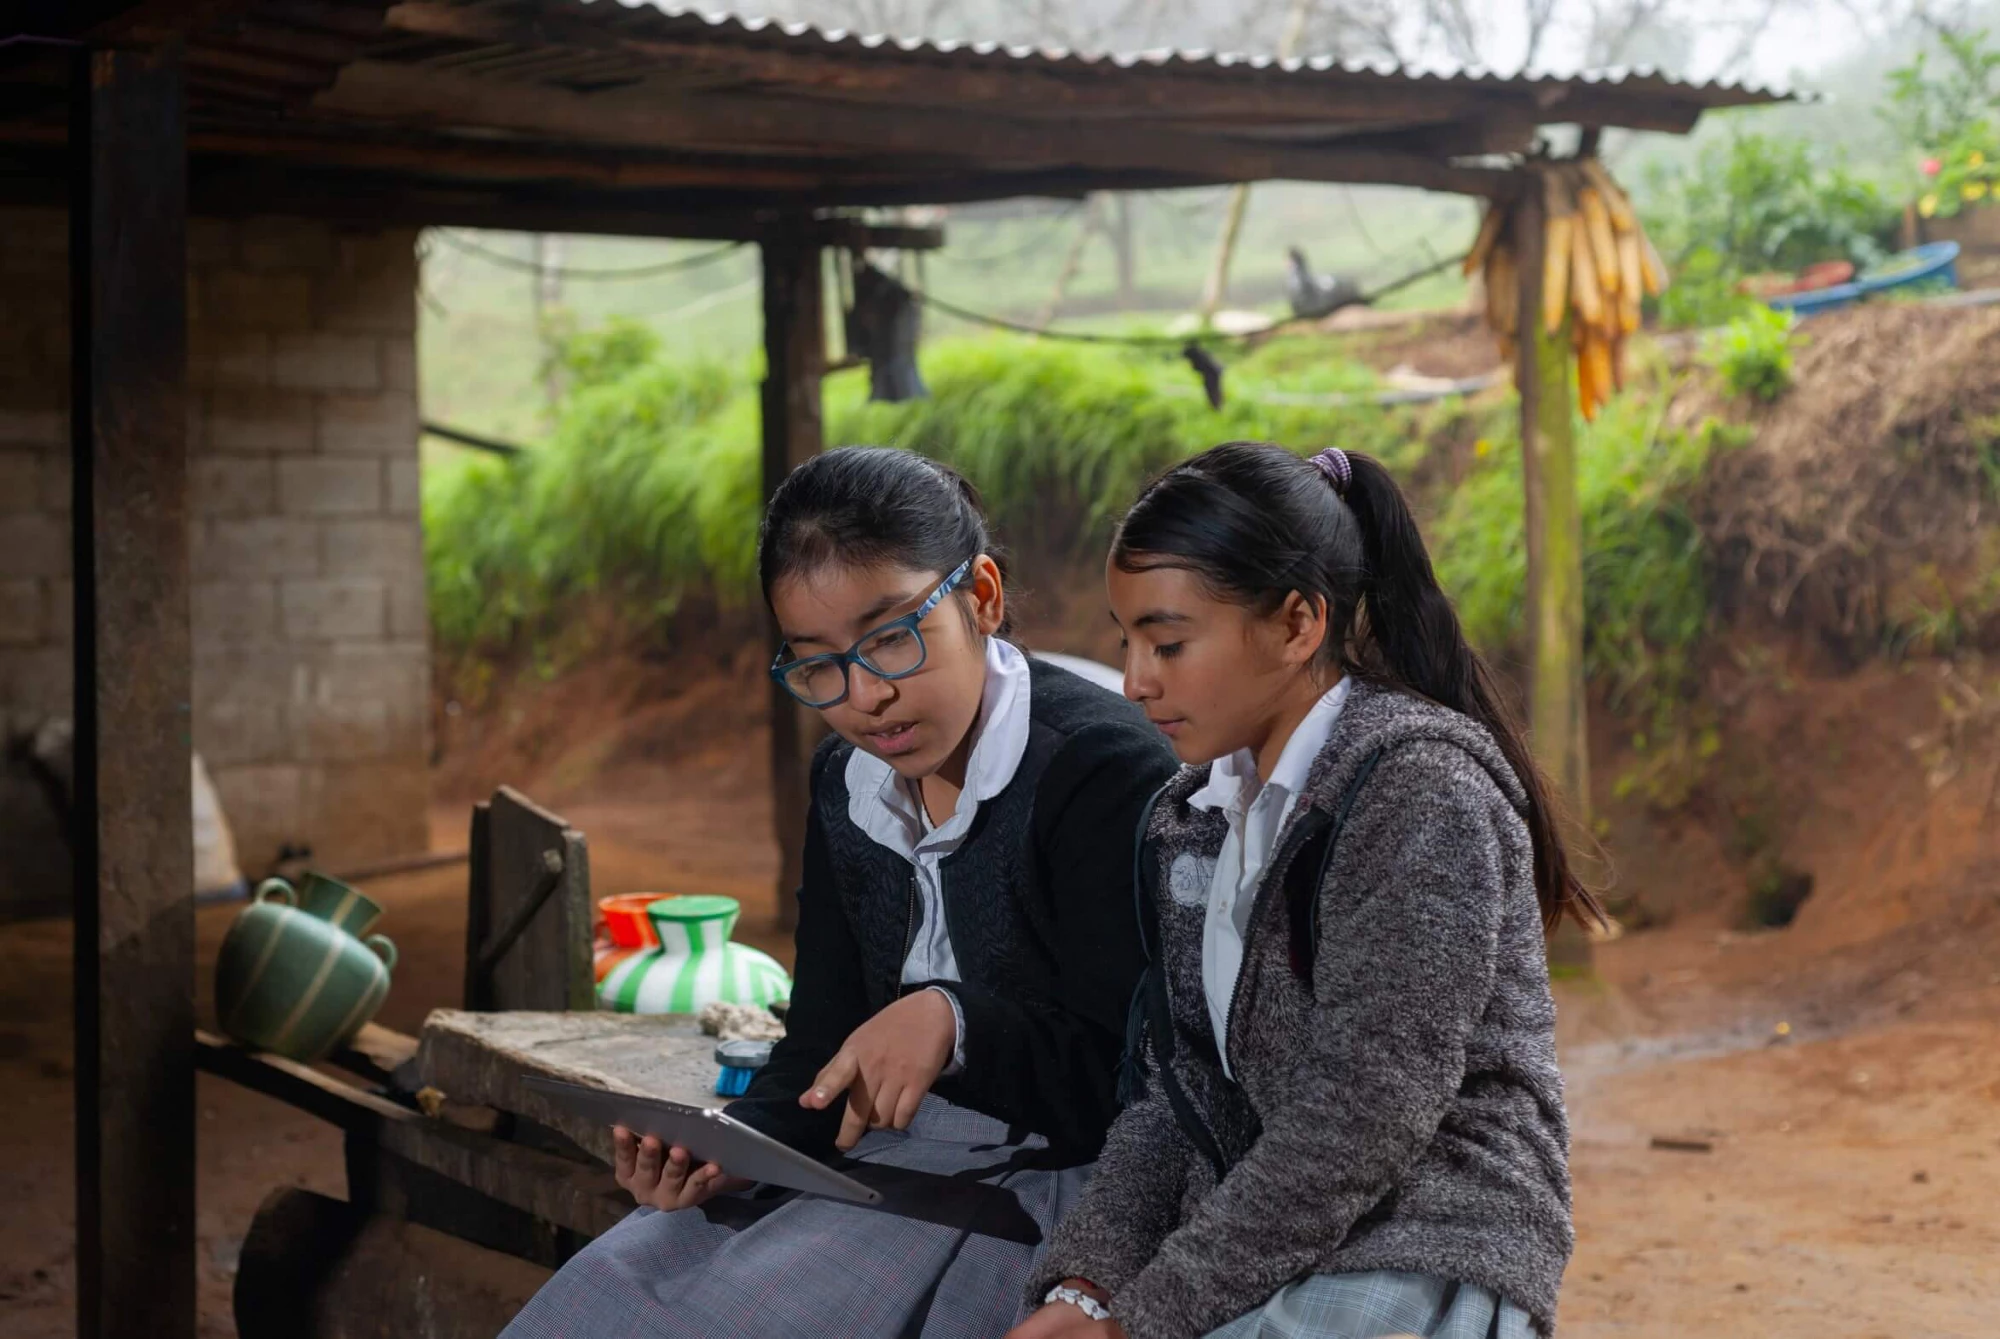 Two young girls in a village in Peru use a tablet to complete their after school activities